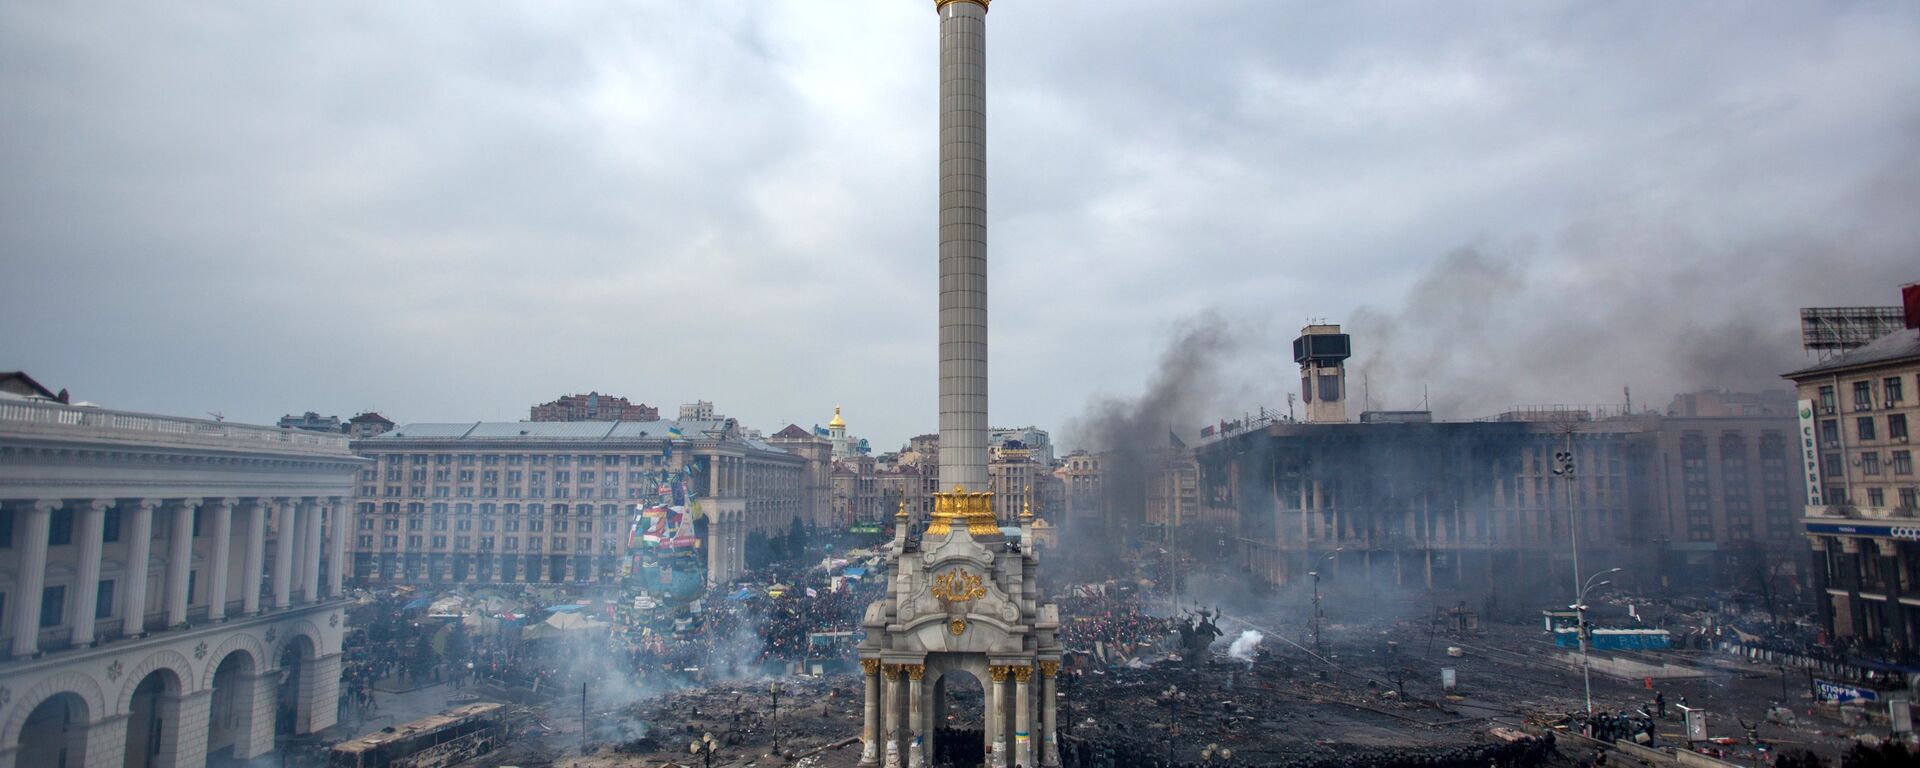 Fire, smoke and protesters on Maidan square in Kiev. February 22, 2014. - Sputnik Africa, 1920, 21.11.2023